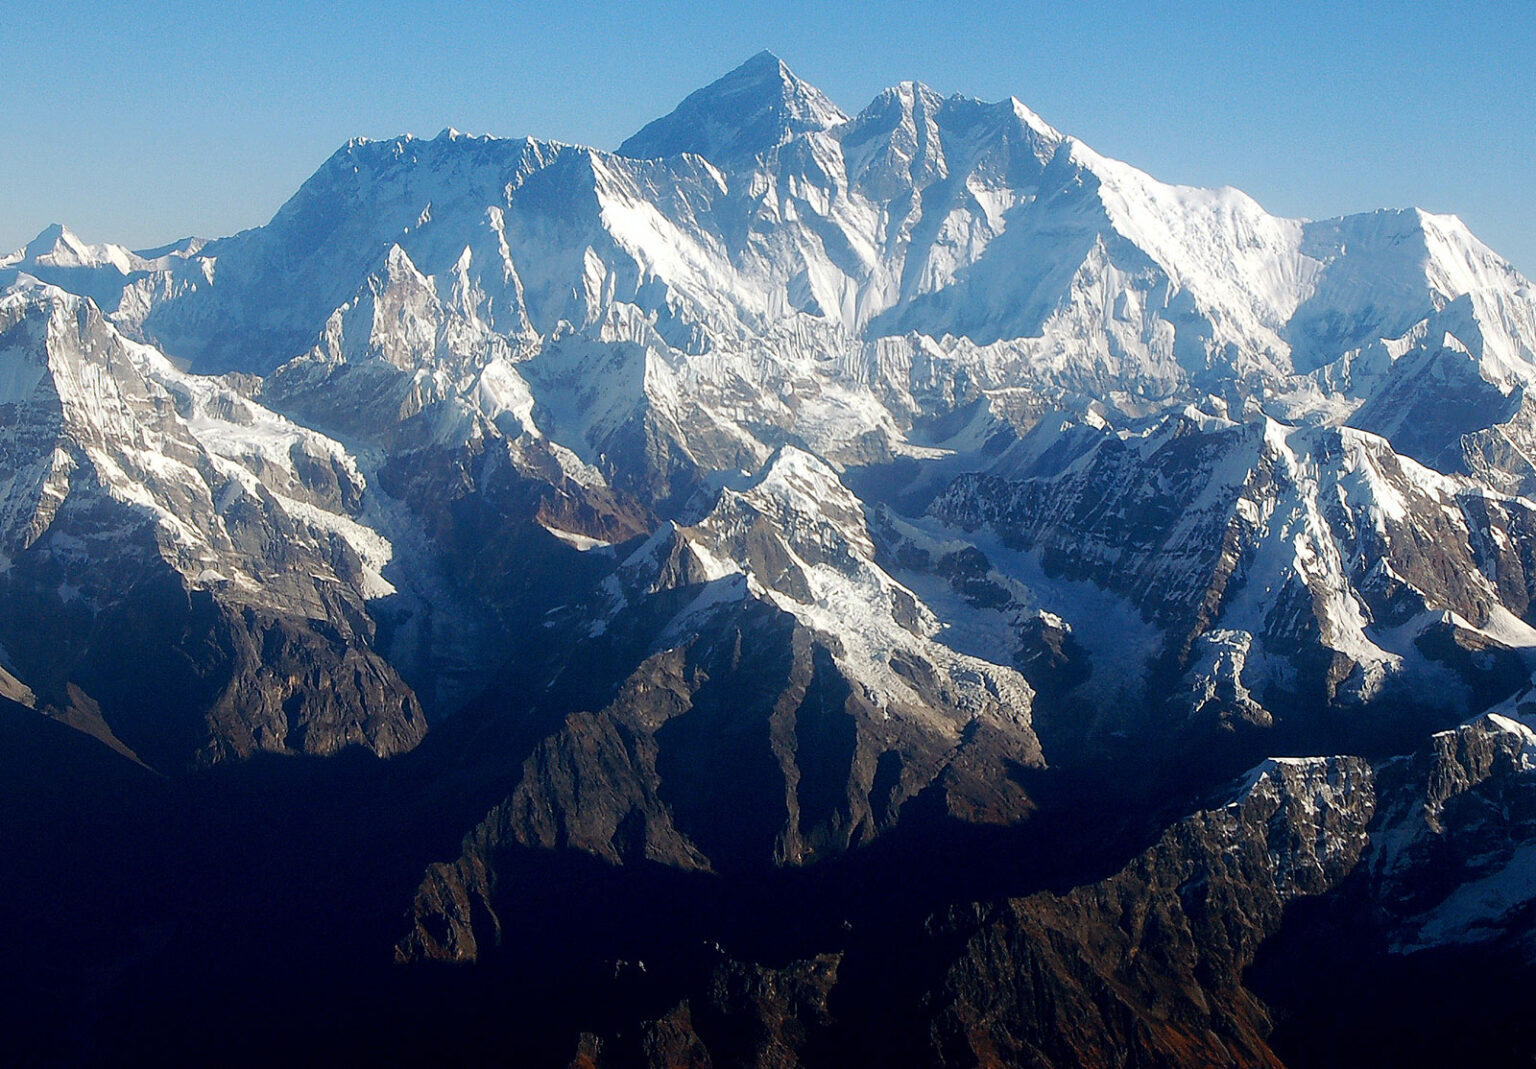 do-you-know-that-yearly-himalaya-mountains-grow-taller-by-2-inches